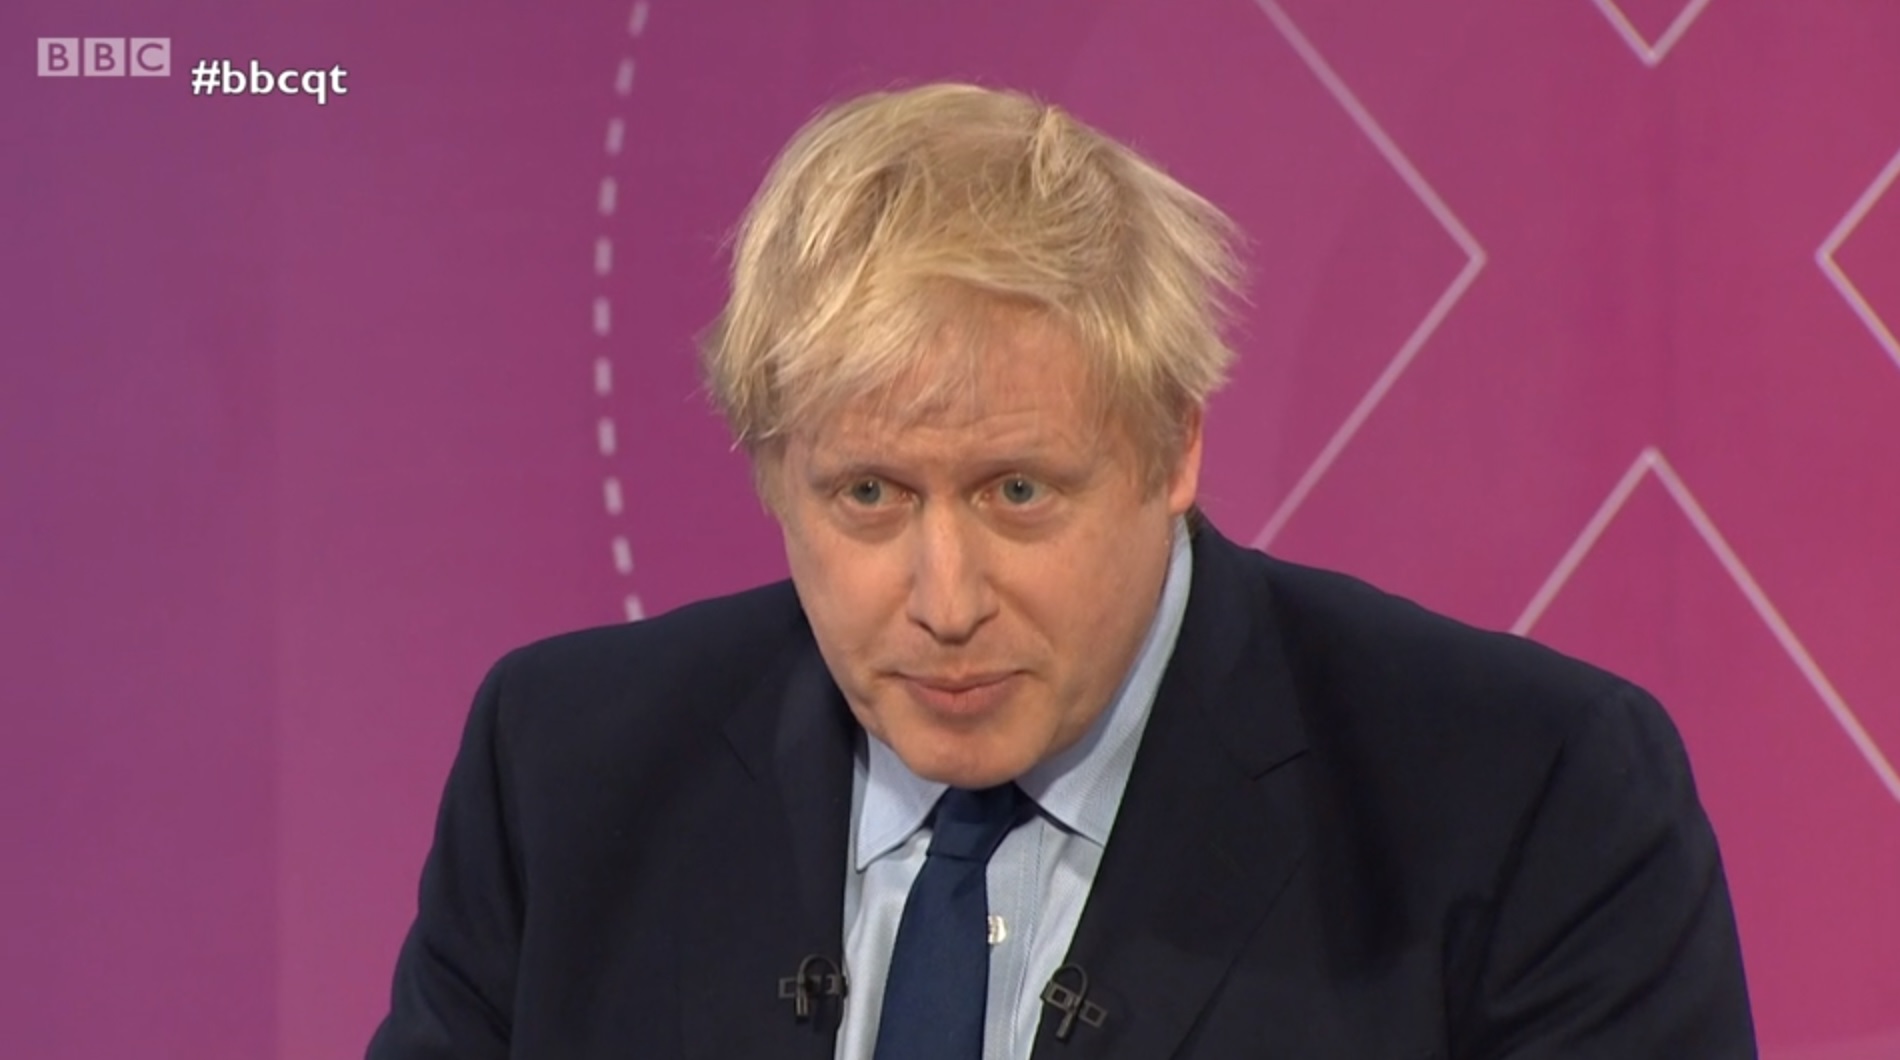 Boris Johnson appeared on BBC Question Time ahead of the December 12 election